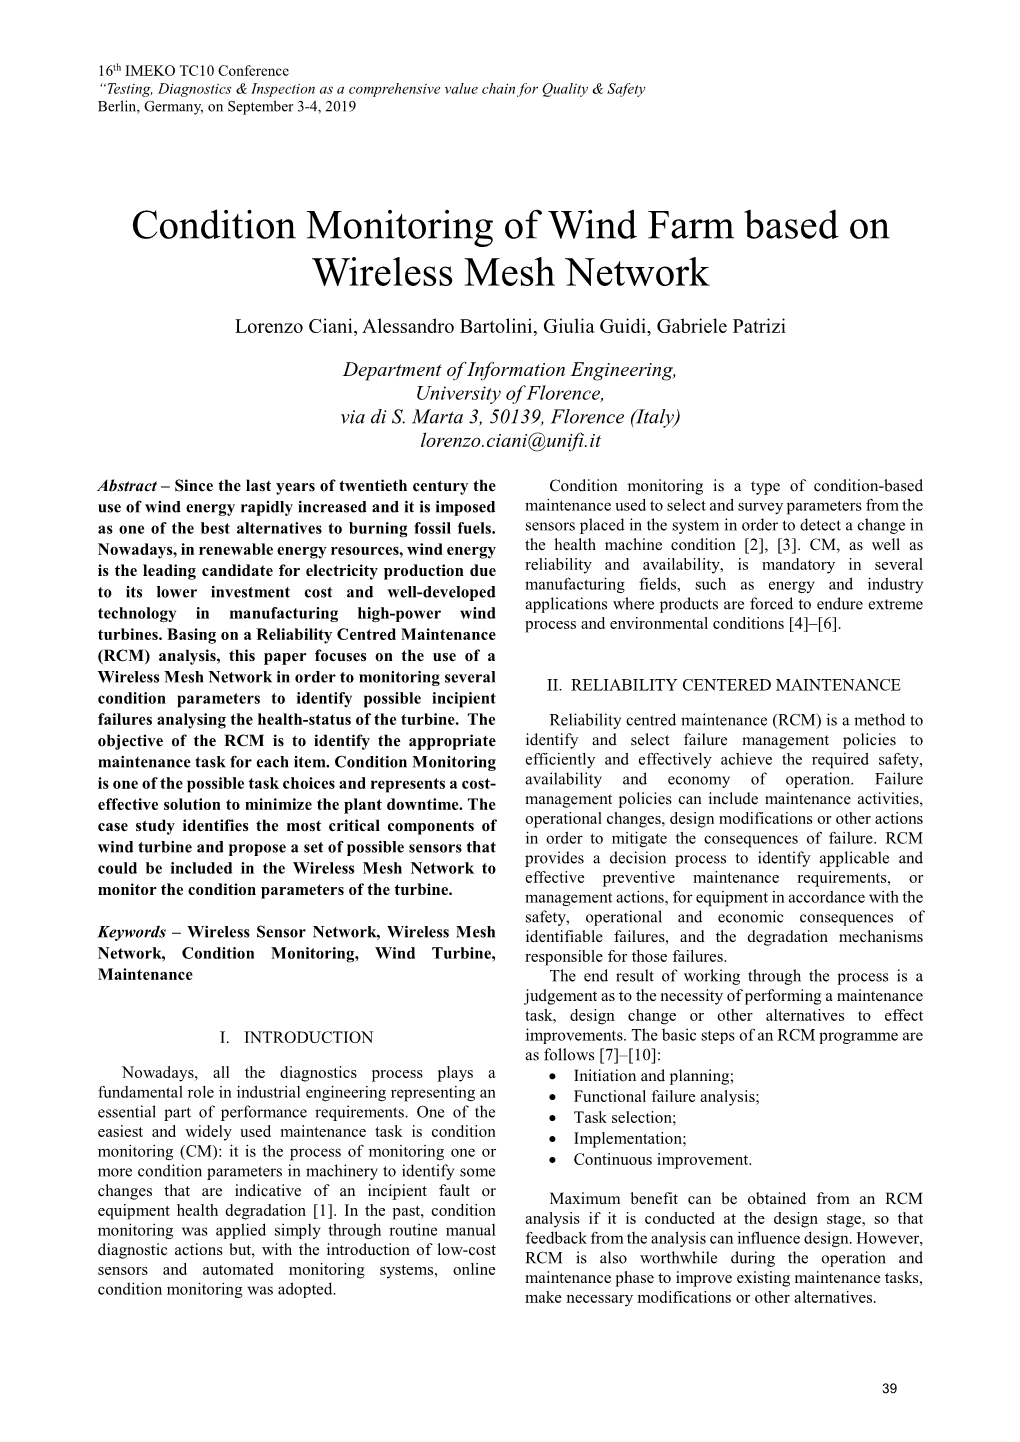 Condition Monitoring of Wind Farm Based on Wireless Mesh Network